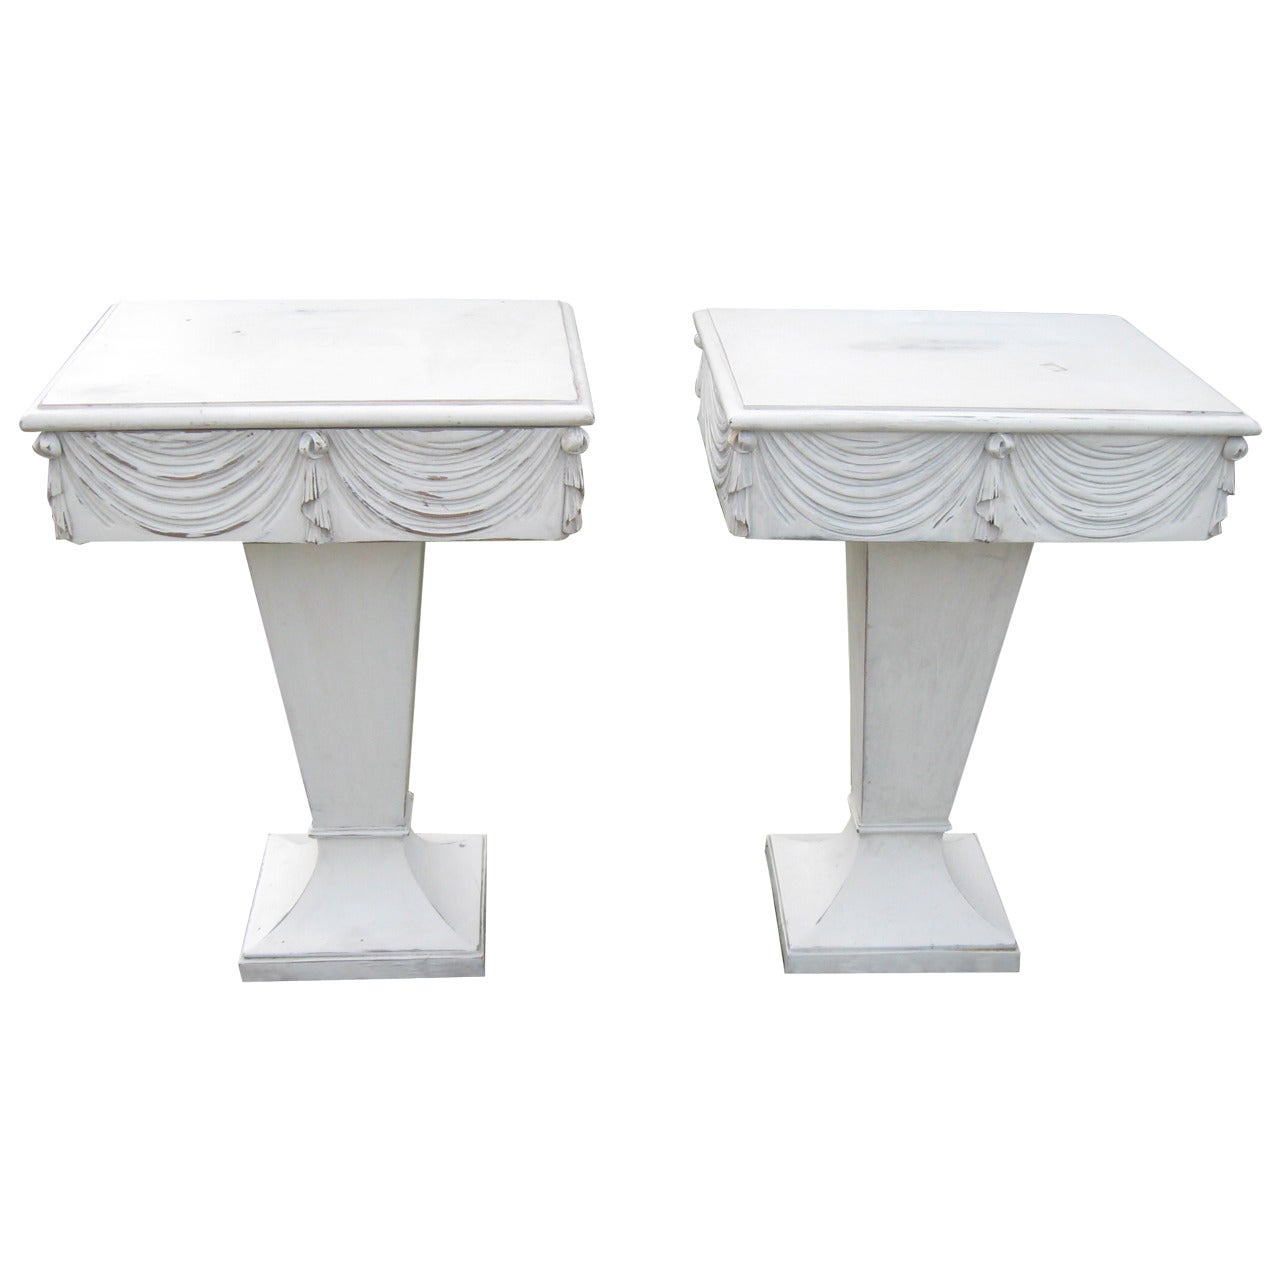 Pair of Grosfeld House Side or Night Tables